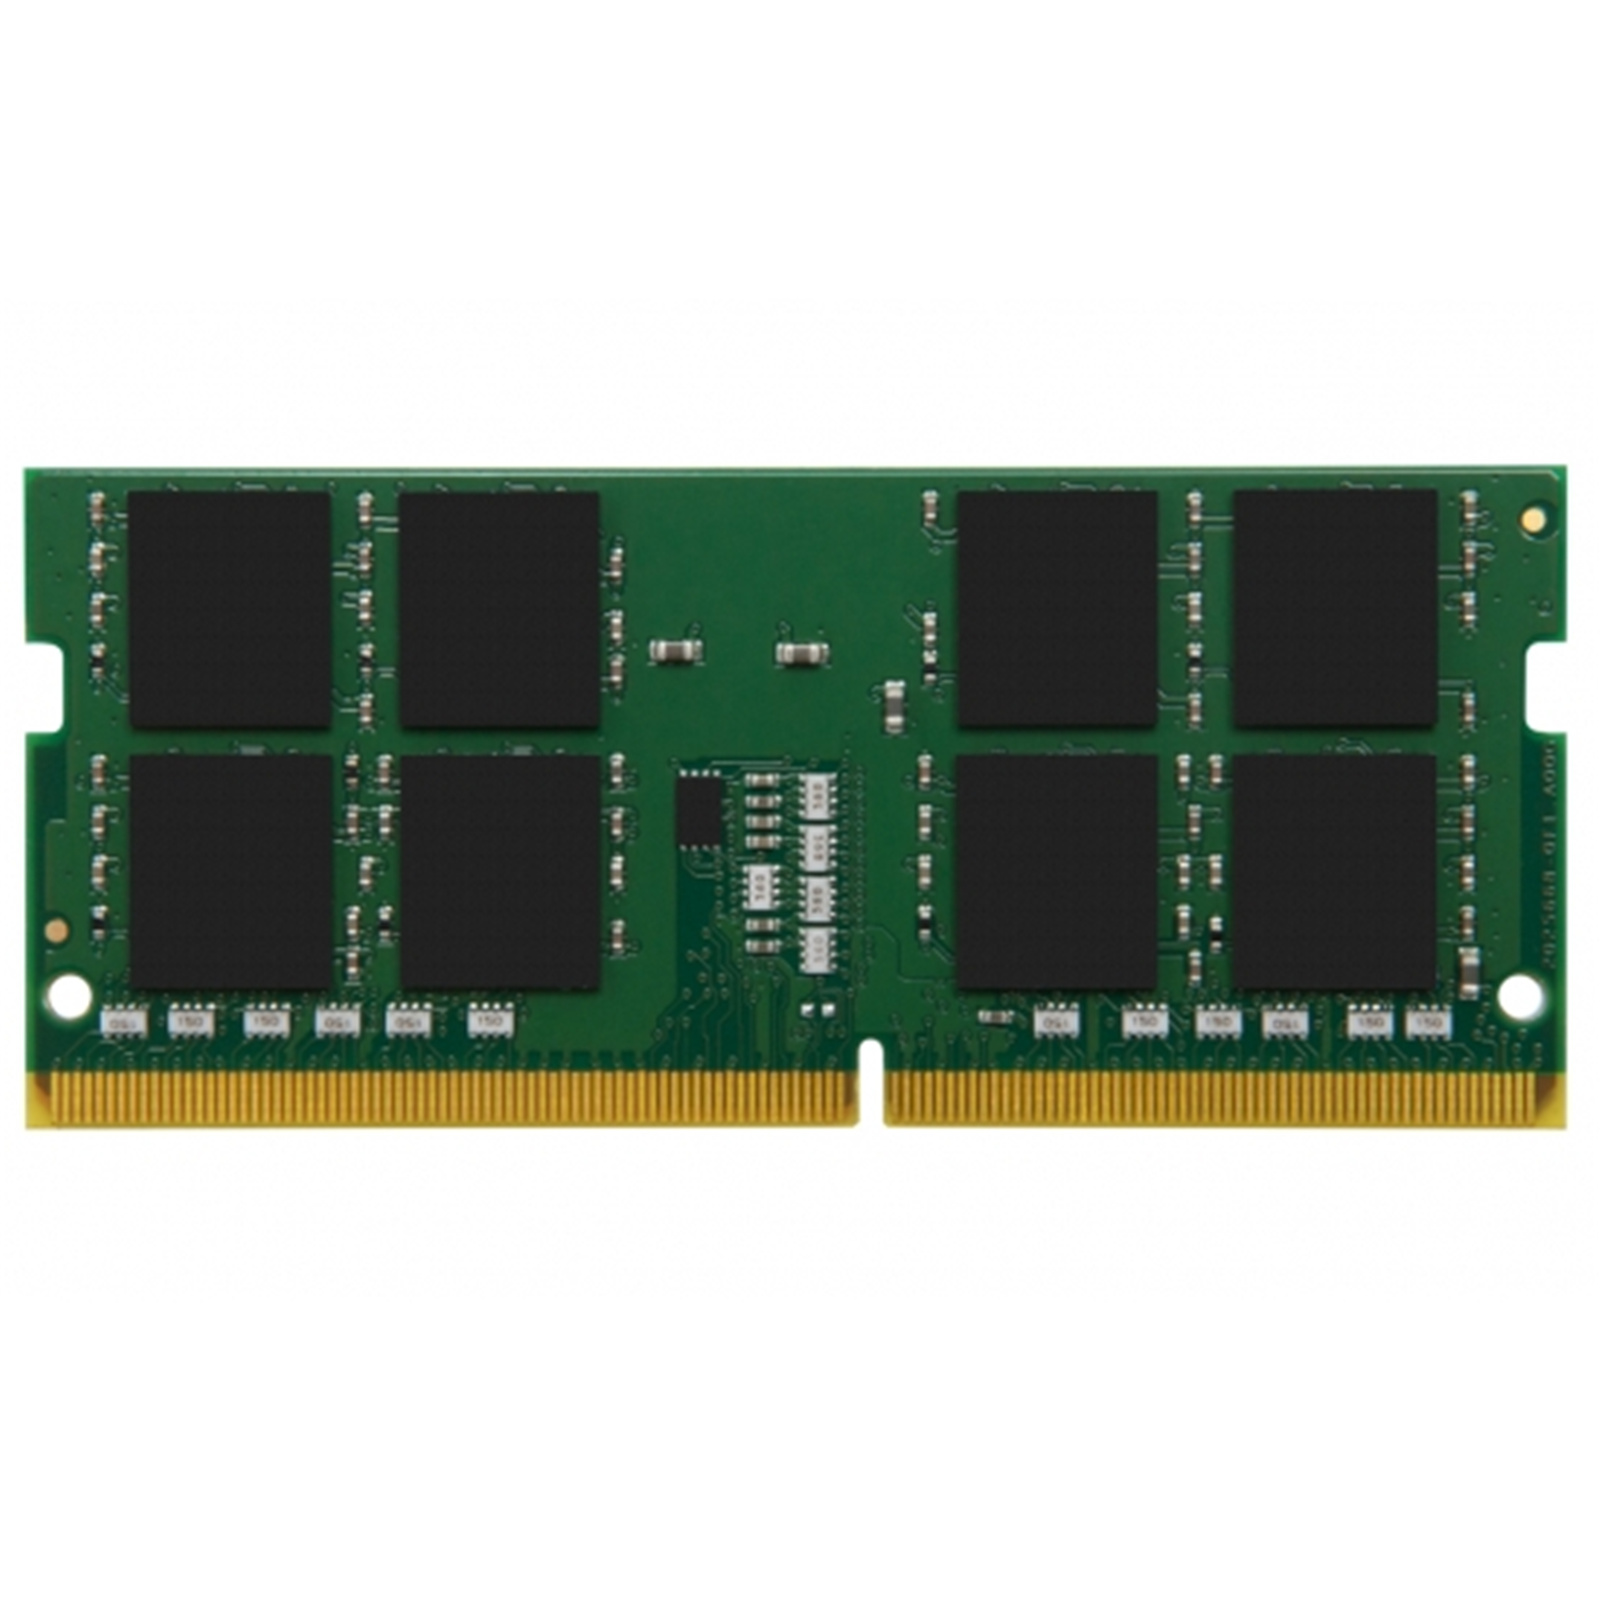 Buy the Kingston KCP426SS6/8 8GB DDR4 Laptop RAM SDRAM - DDR4-2666 - PC4- 21333... ( KCP426SS6/8 ) online - PBTech.com/pacific